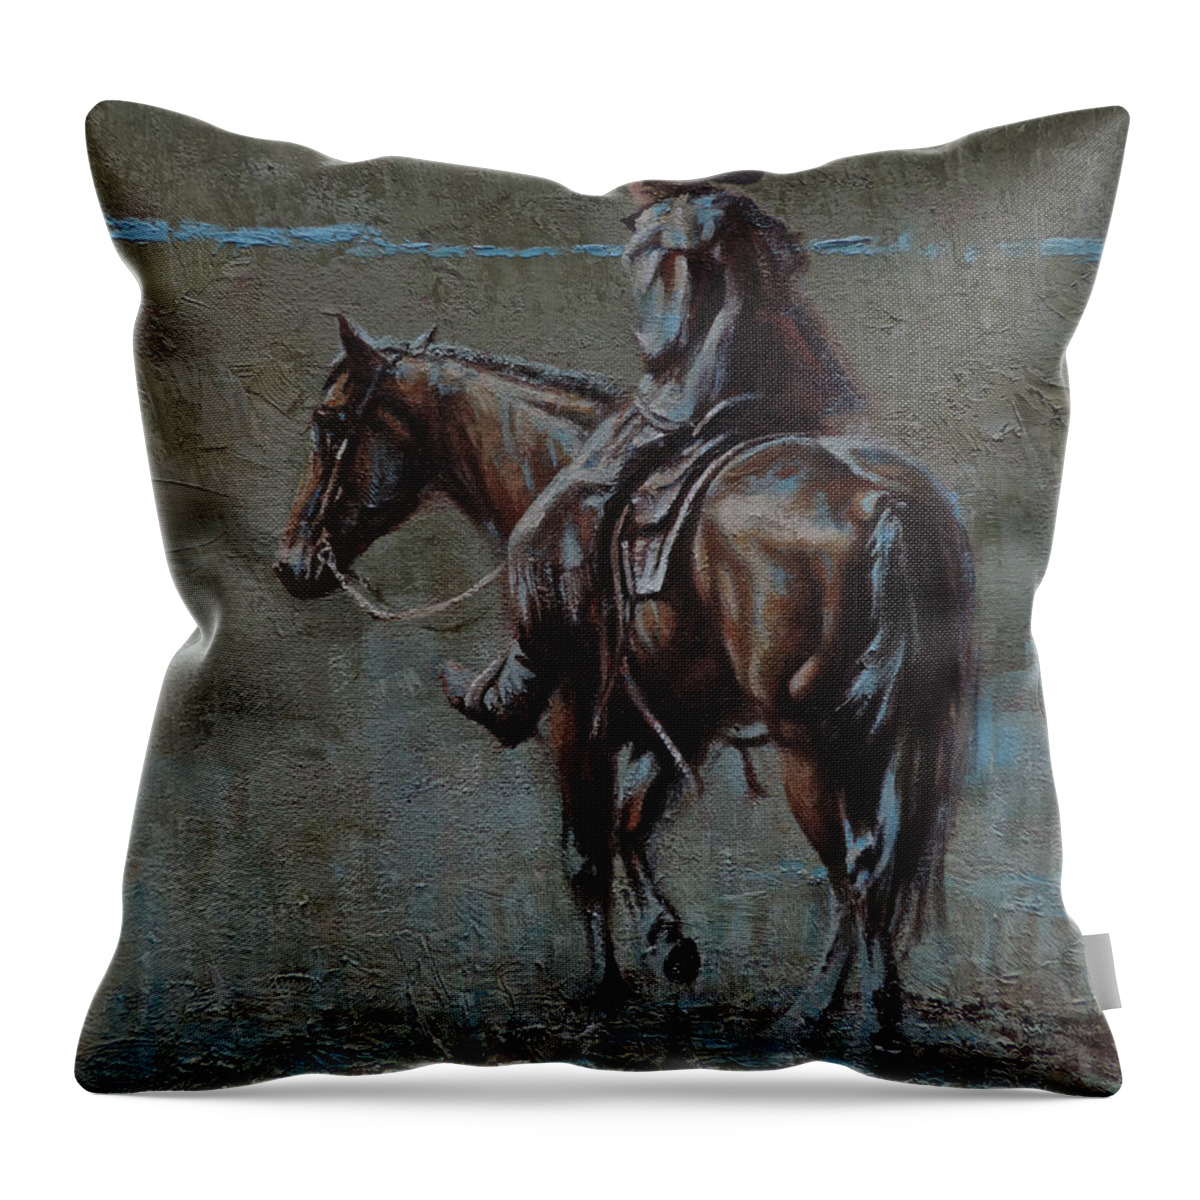 Cowboys Throw Pillow featuring the painting One Last Look by Mia DeLode